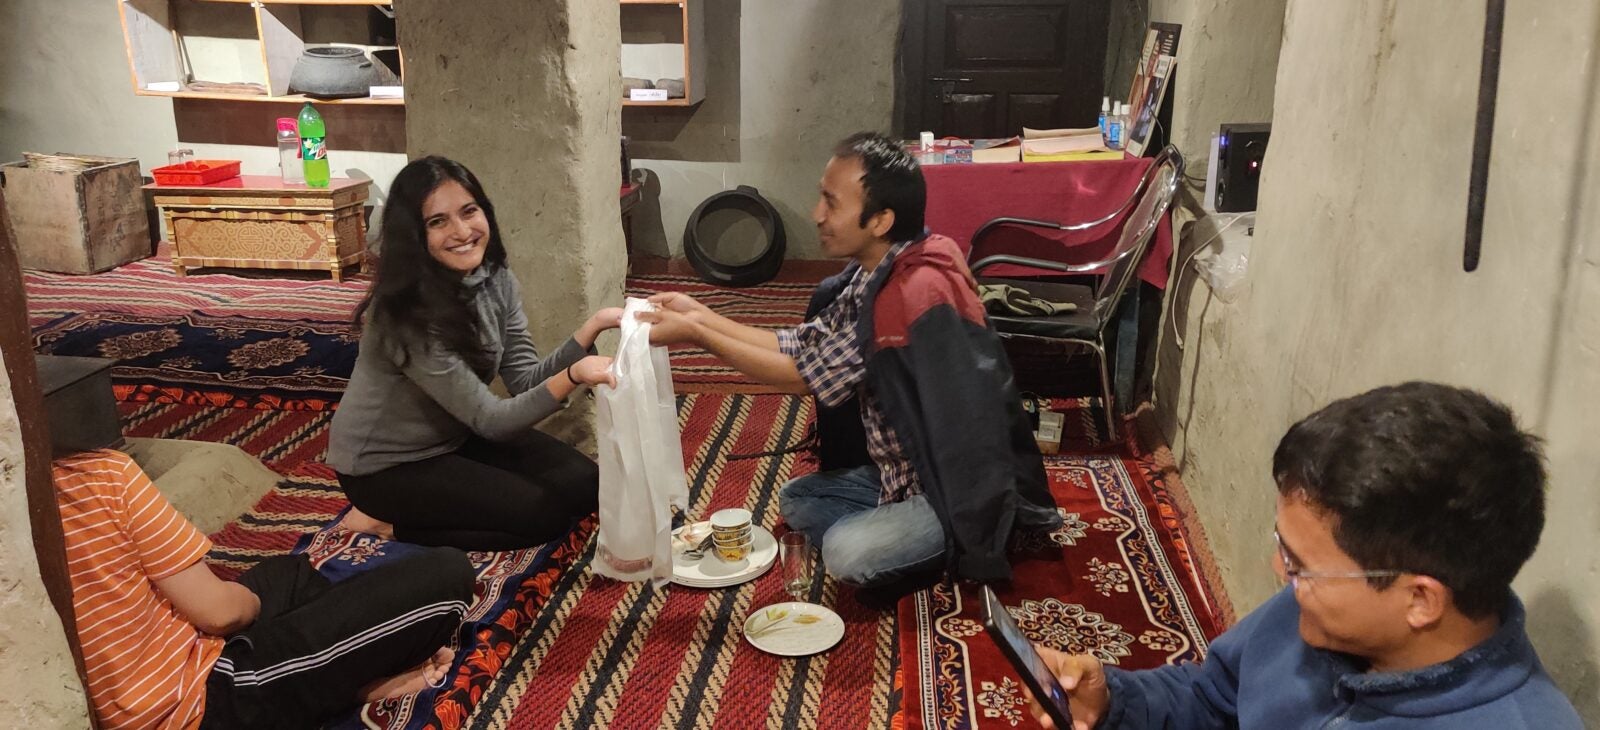 Pashmina accepting a goody bag from a man while they sit on the floor.